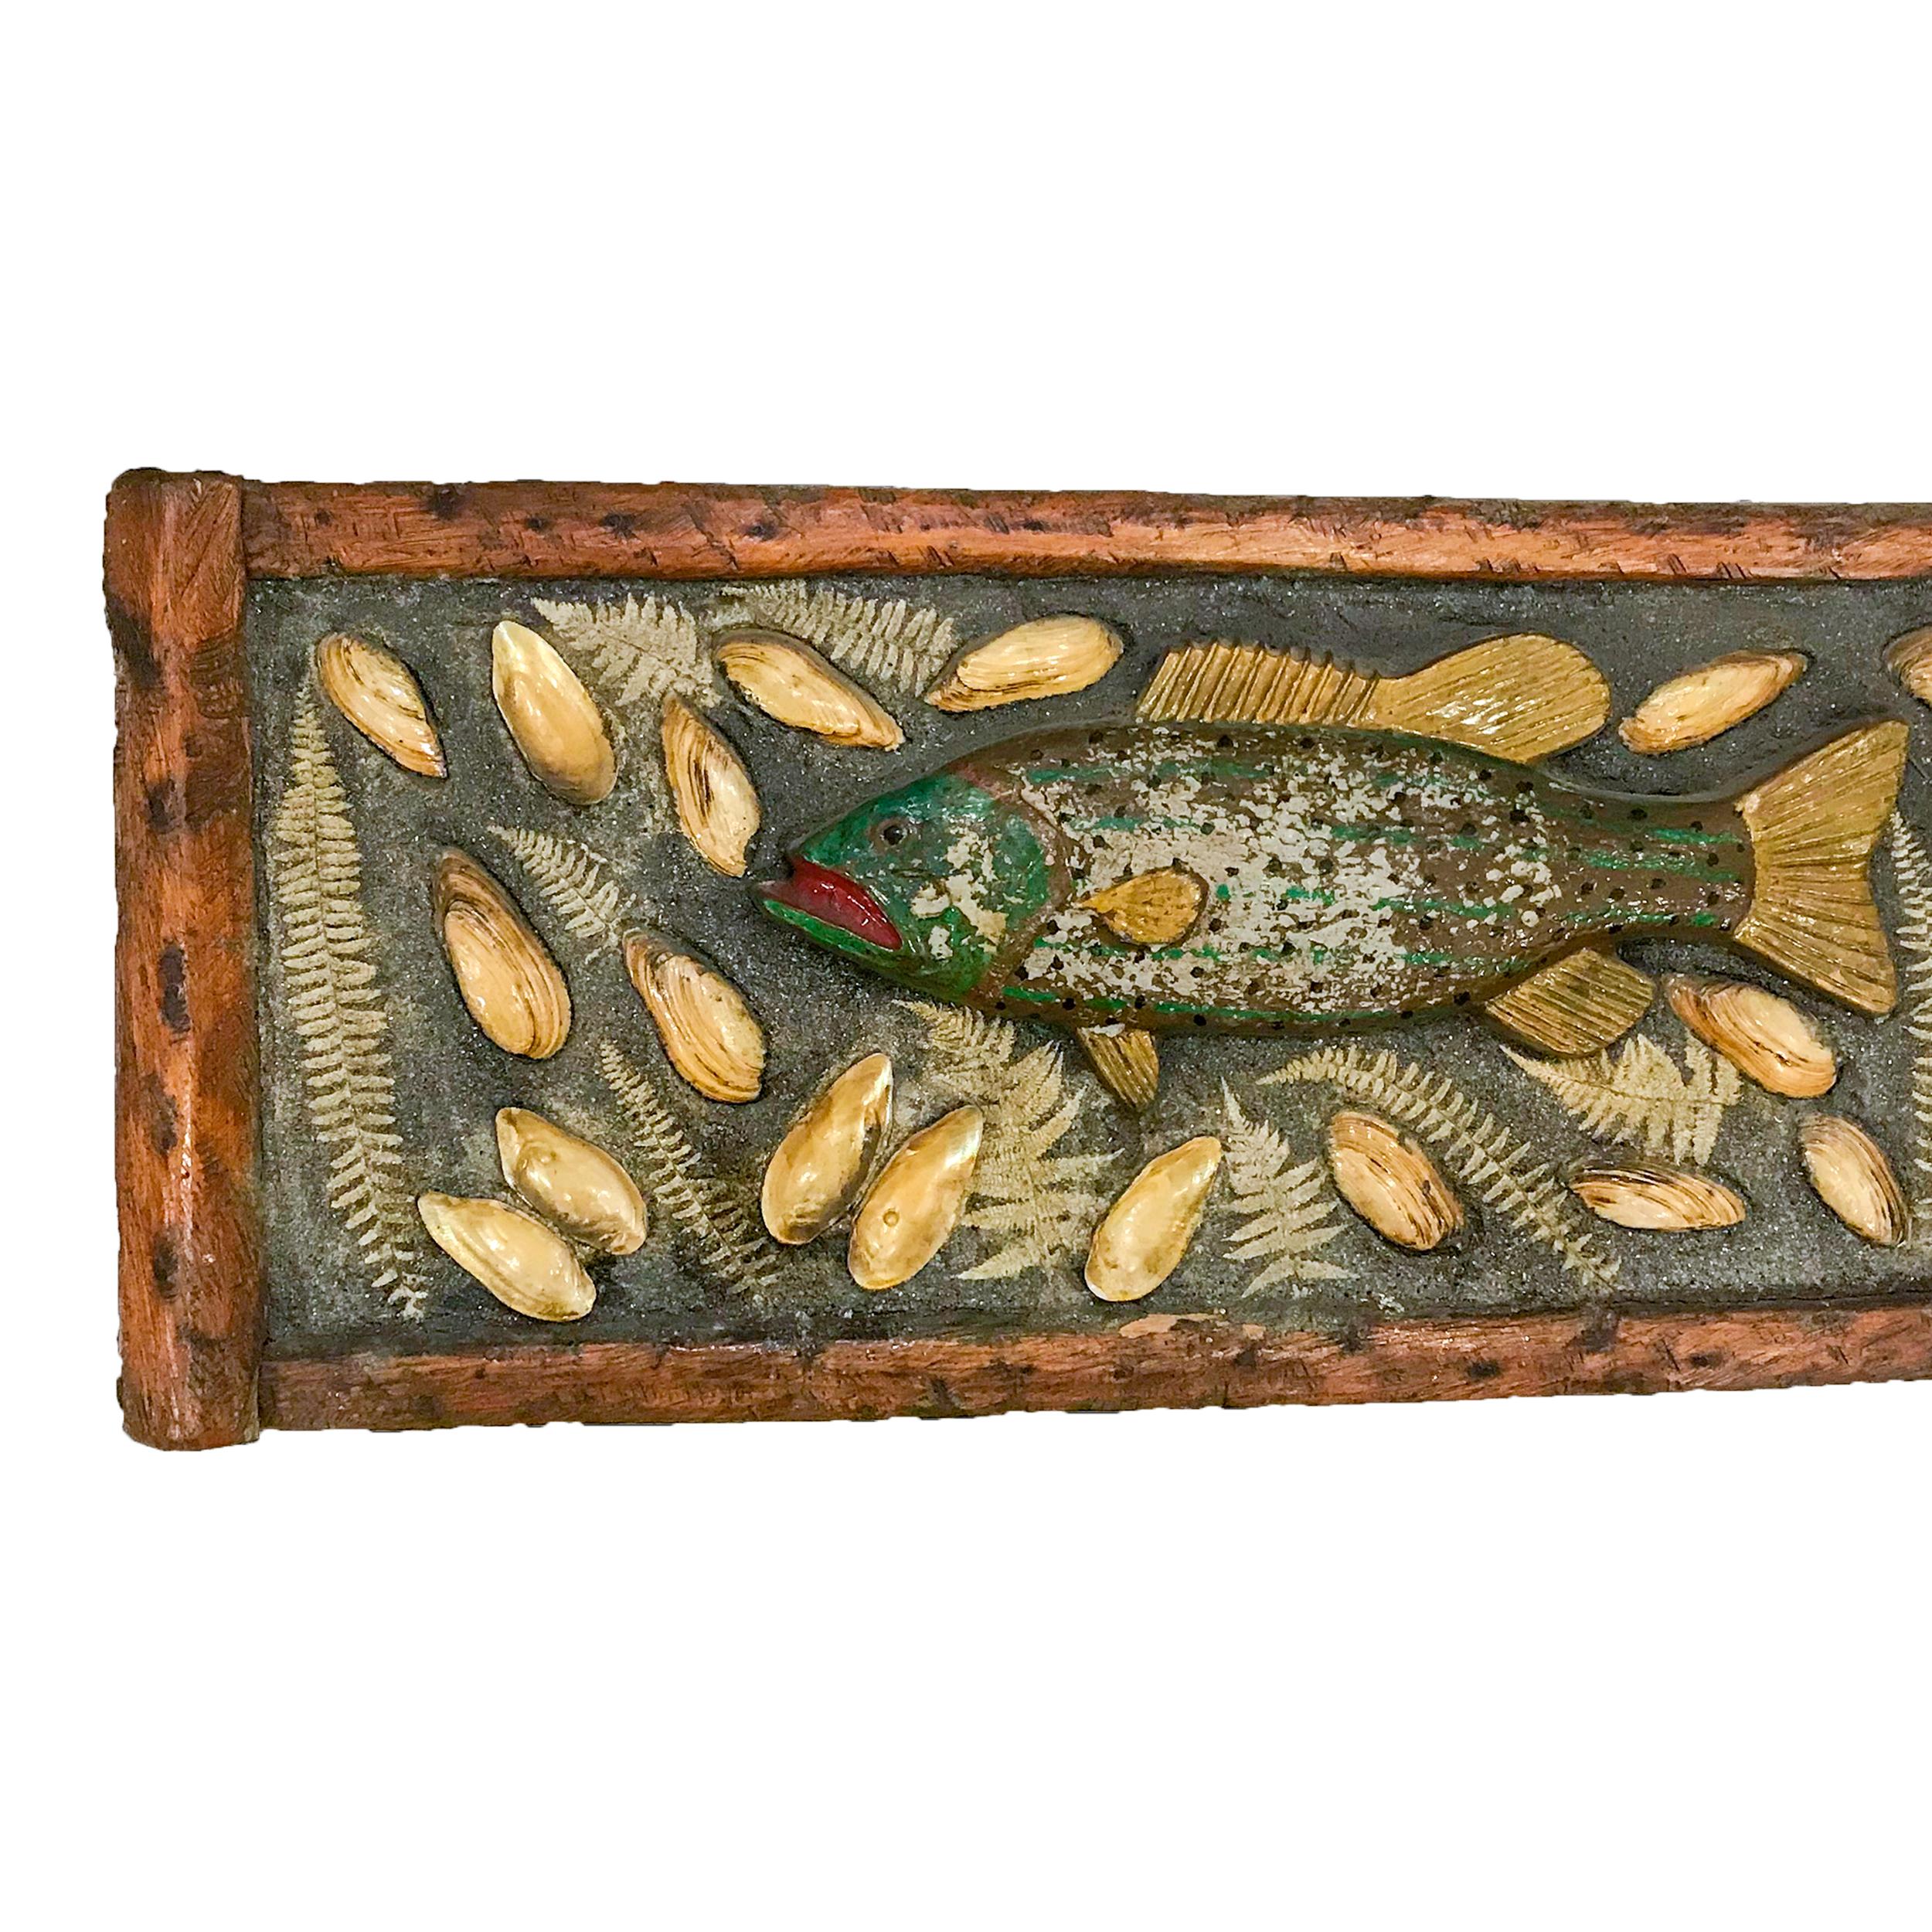 Adirondack style plaque of a lake fish. Carved from wood with glass eyes, mounted on cement with shells and fern leaves. Mounted in a painted branch frame,

circa 1950.

Measures: 17